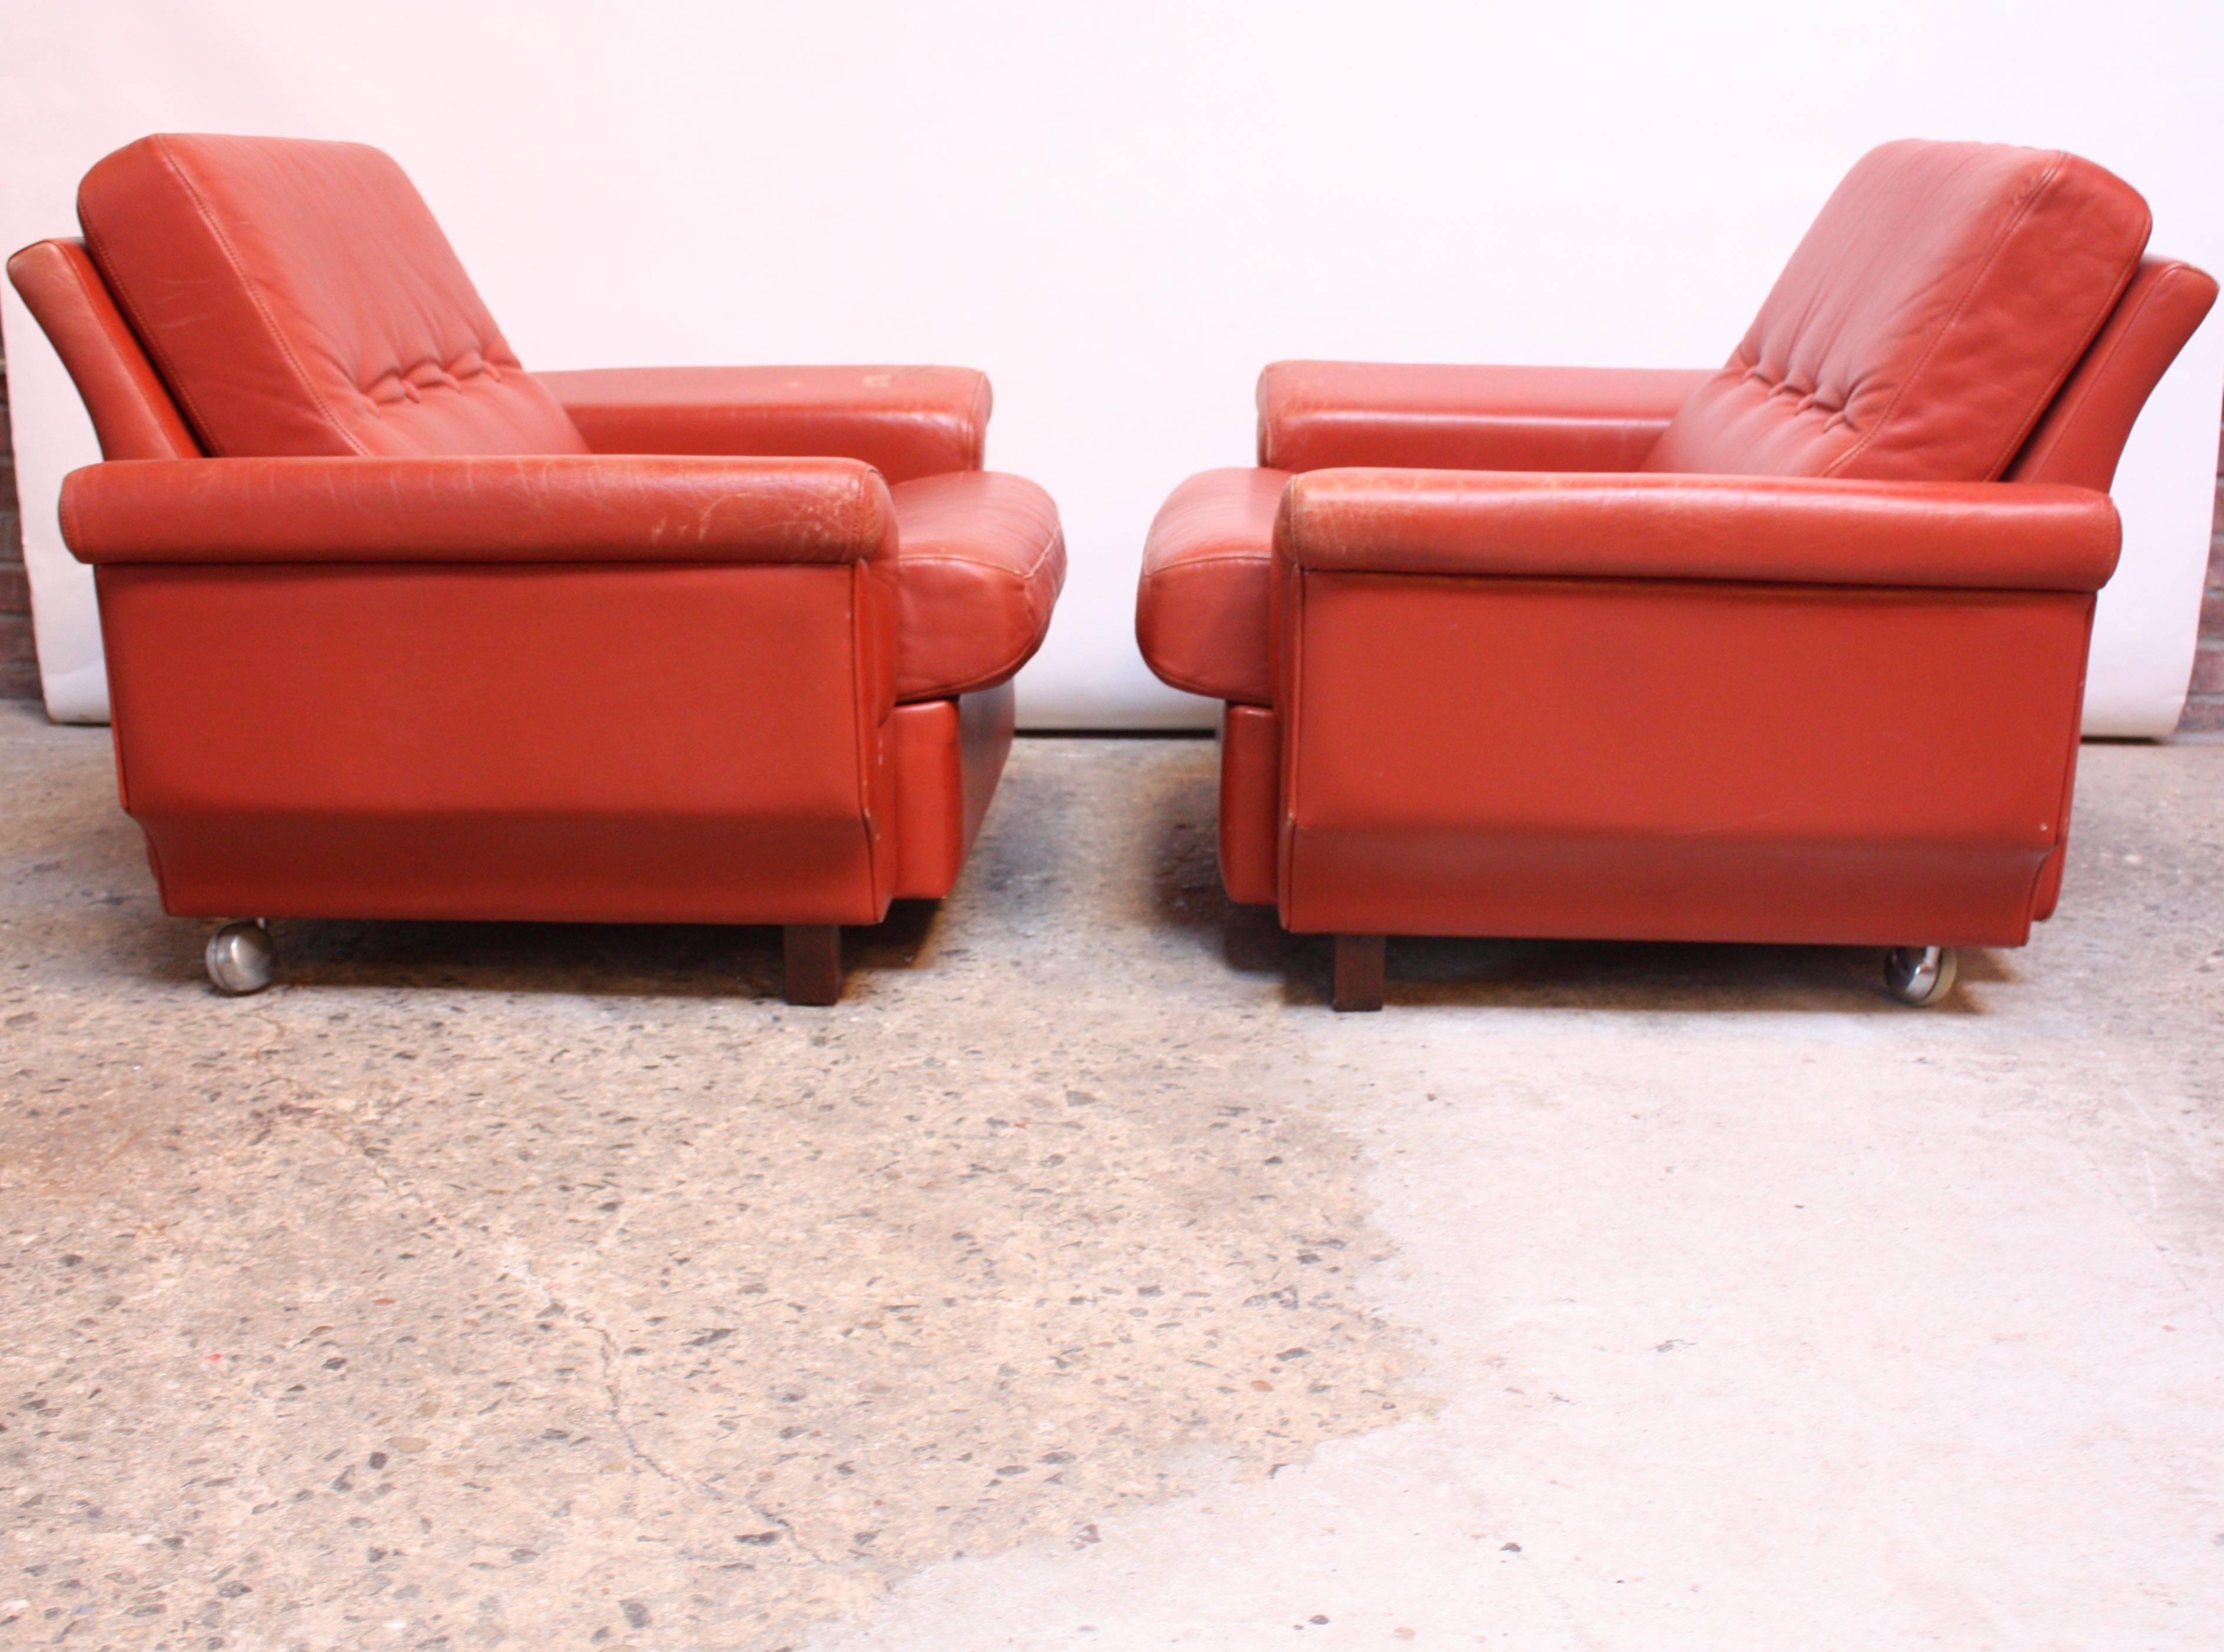 Mid-Century Modern Pair of Danish Modern Lounge Chairs in Coral Leather